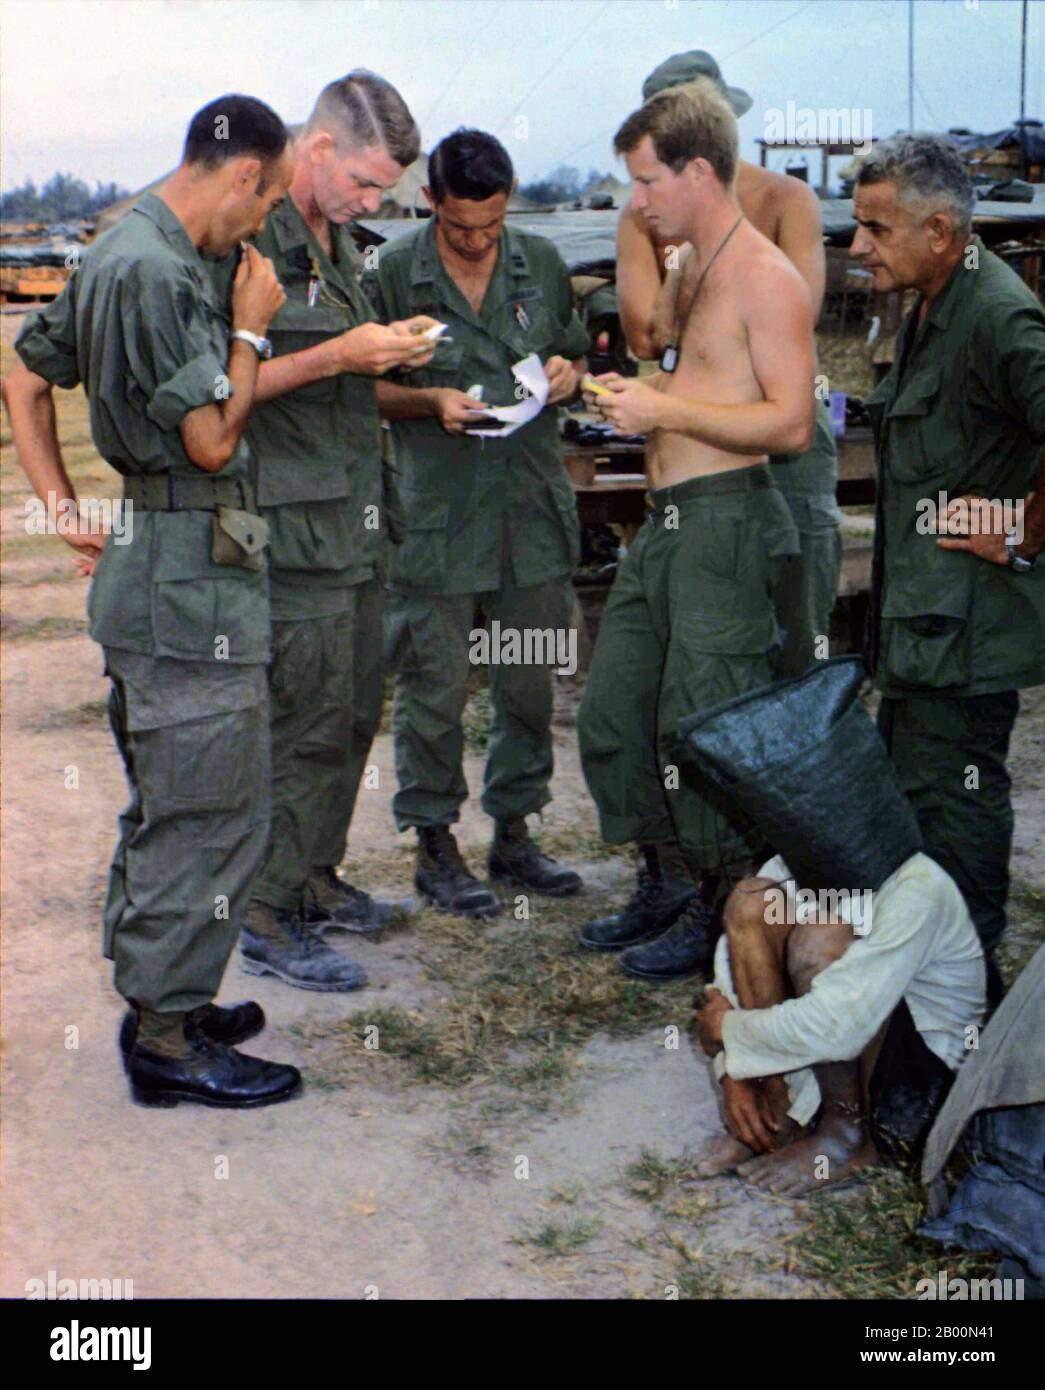 Vietnam: An NLF (Viet Cong) suspect, captured during an attack on an American outpost near the Cambodian border in South Vietnam, 1968, is interrogated.  The Vietcong (Vietnamese: Việt cộng), or National Liberation Front (NLF), was a political organization and army in South Vietnam and Cambodia that fought the United States and South Vietnamese governments during the Vietnam War (1955–1975). It had both guerrilla and regular army units, as well as a network of cadres who organized peasants in the territory it controlled. Many soldiers were recruited in South Vietnam. Stock Photo